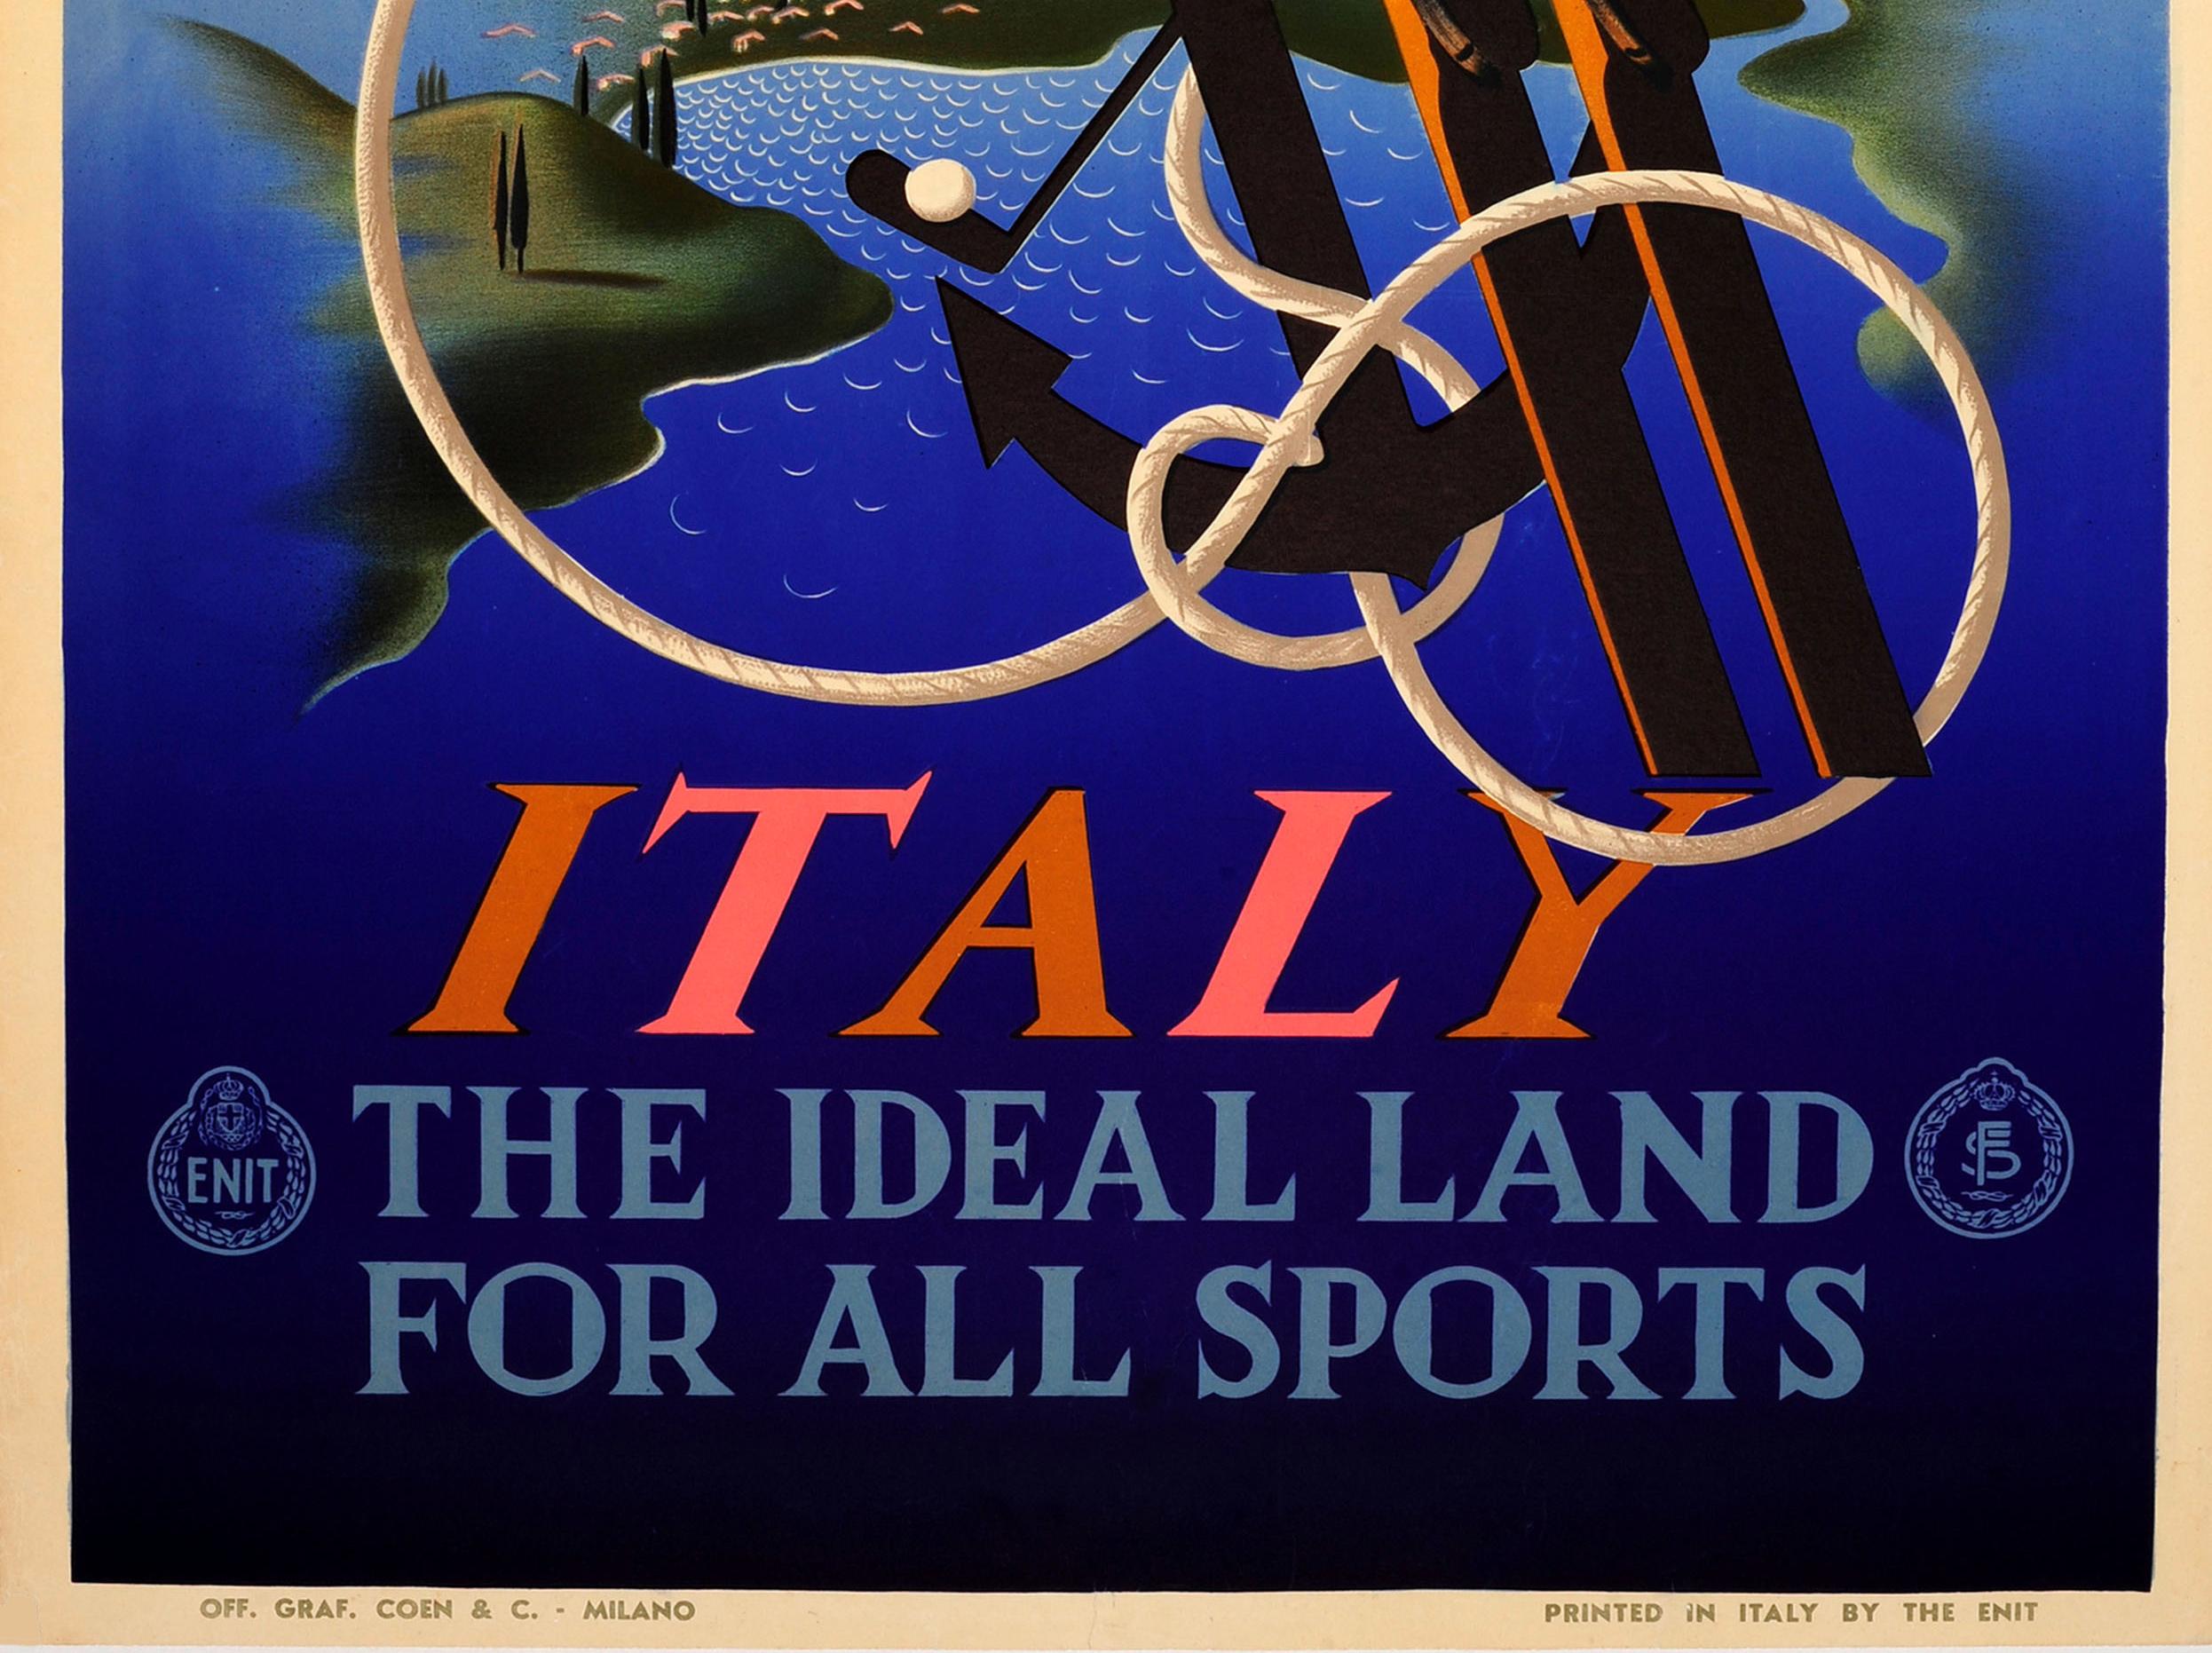 Italian Original Vintage ENIT Travel Poster By Cassandre Italy Ideal Land For All Sports For Sale